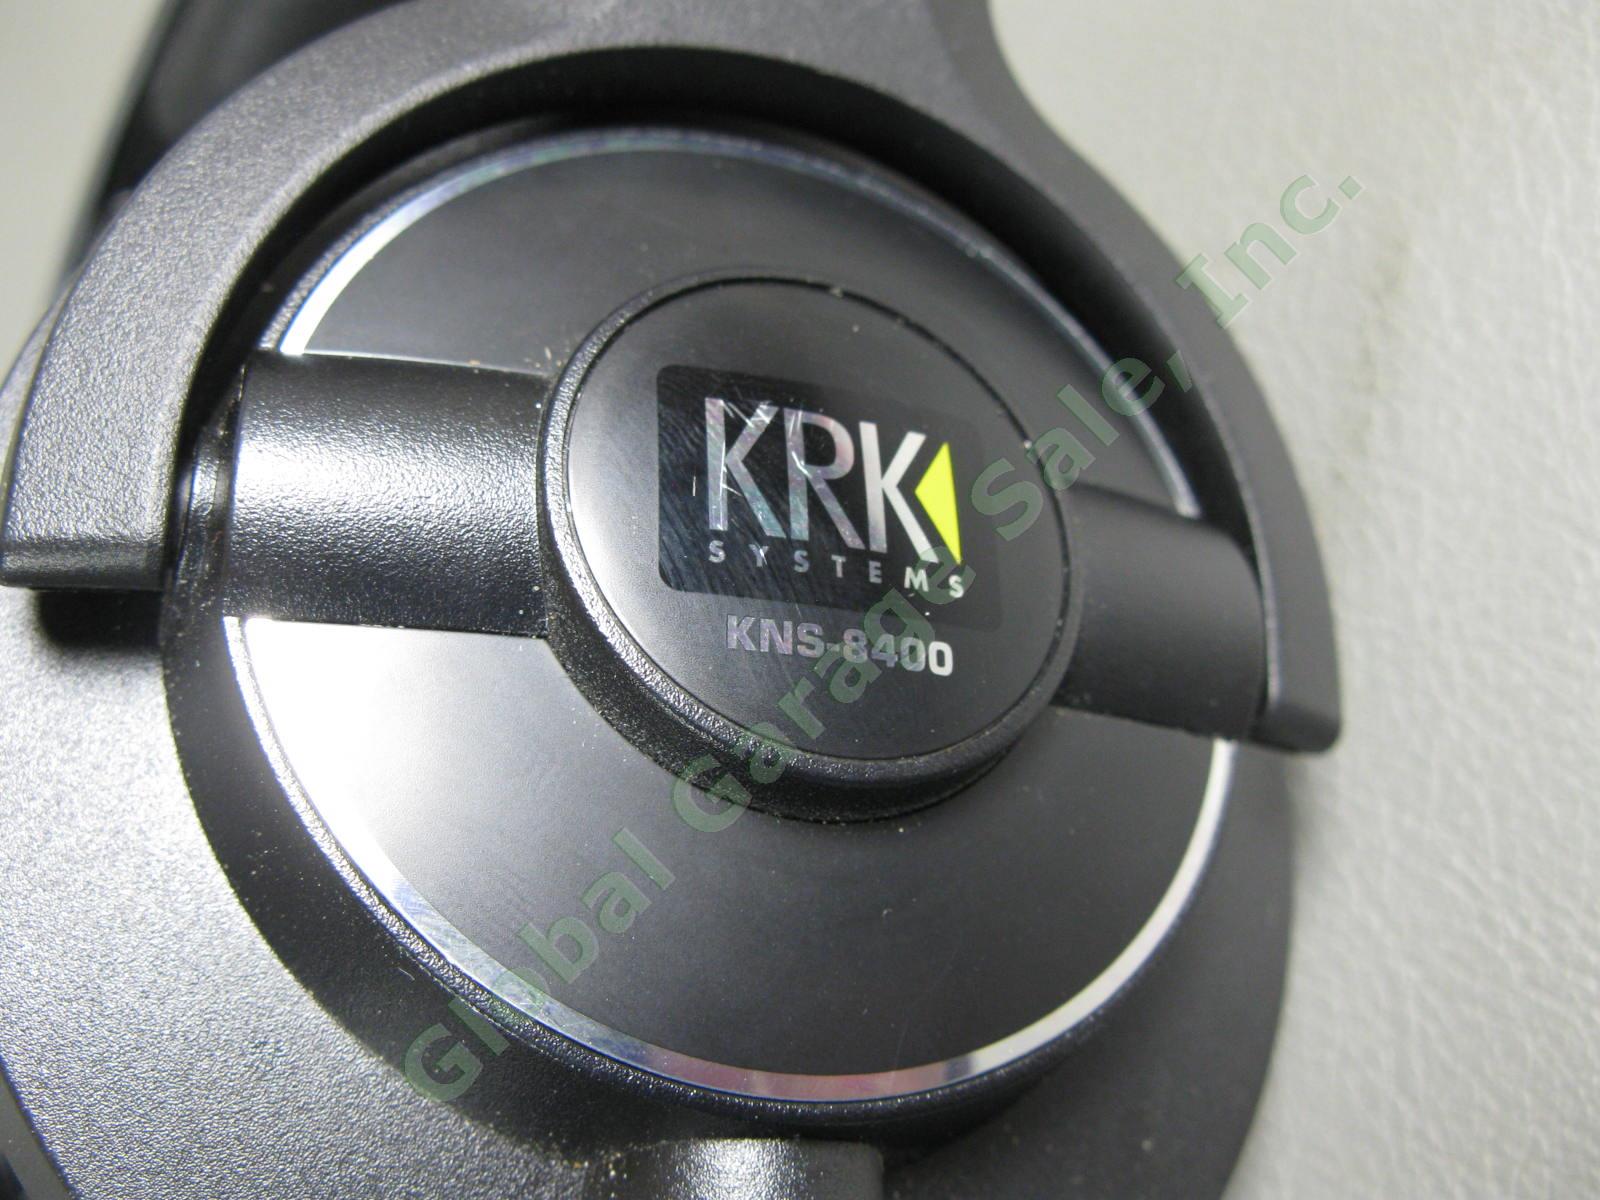 KRK Systems KNS-8400 Professional Dynamic Reference Studio Monitor Headphones NR 2